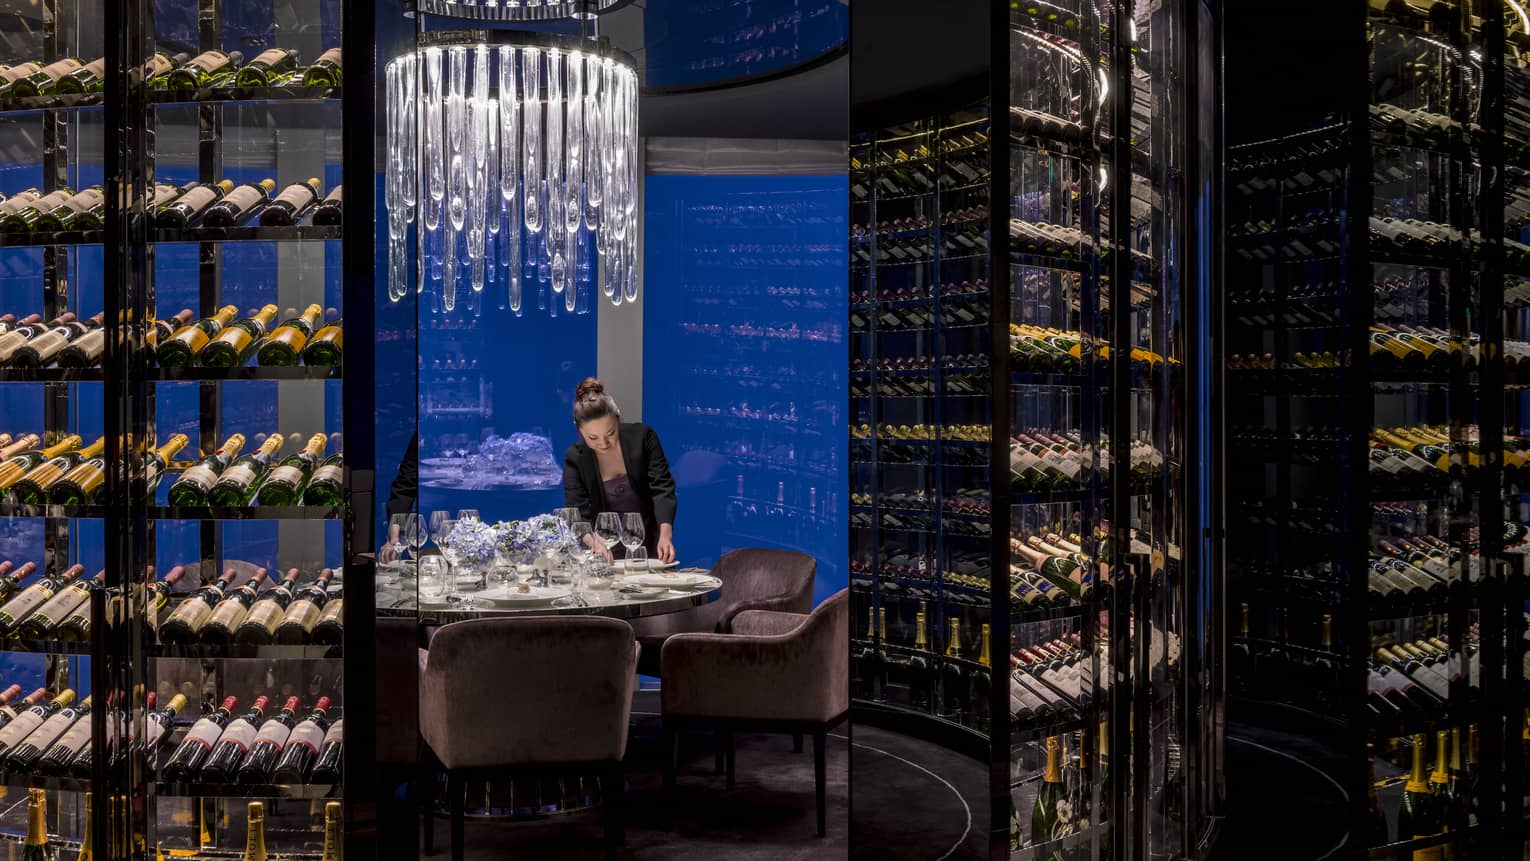 Woman sets plate on round private dining table under crystal chandelier, surrounded by wine cellars